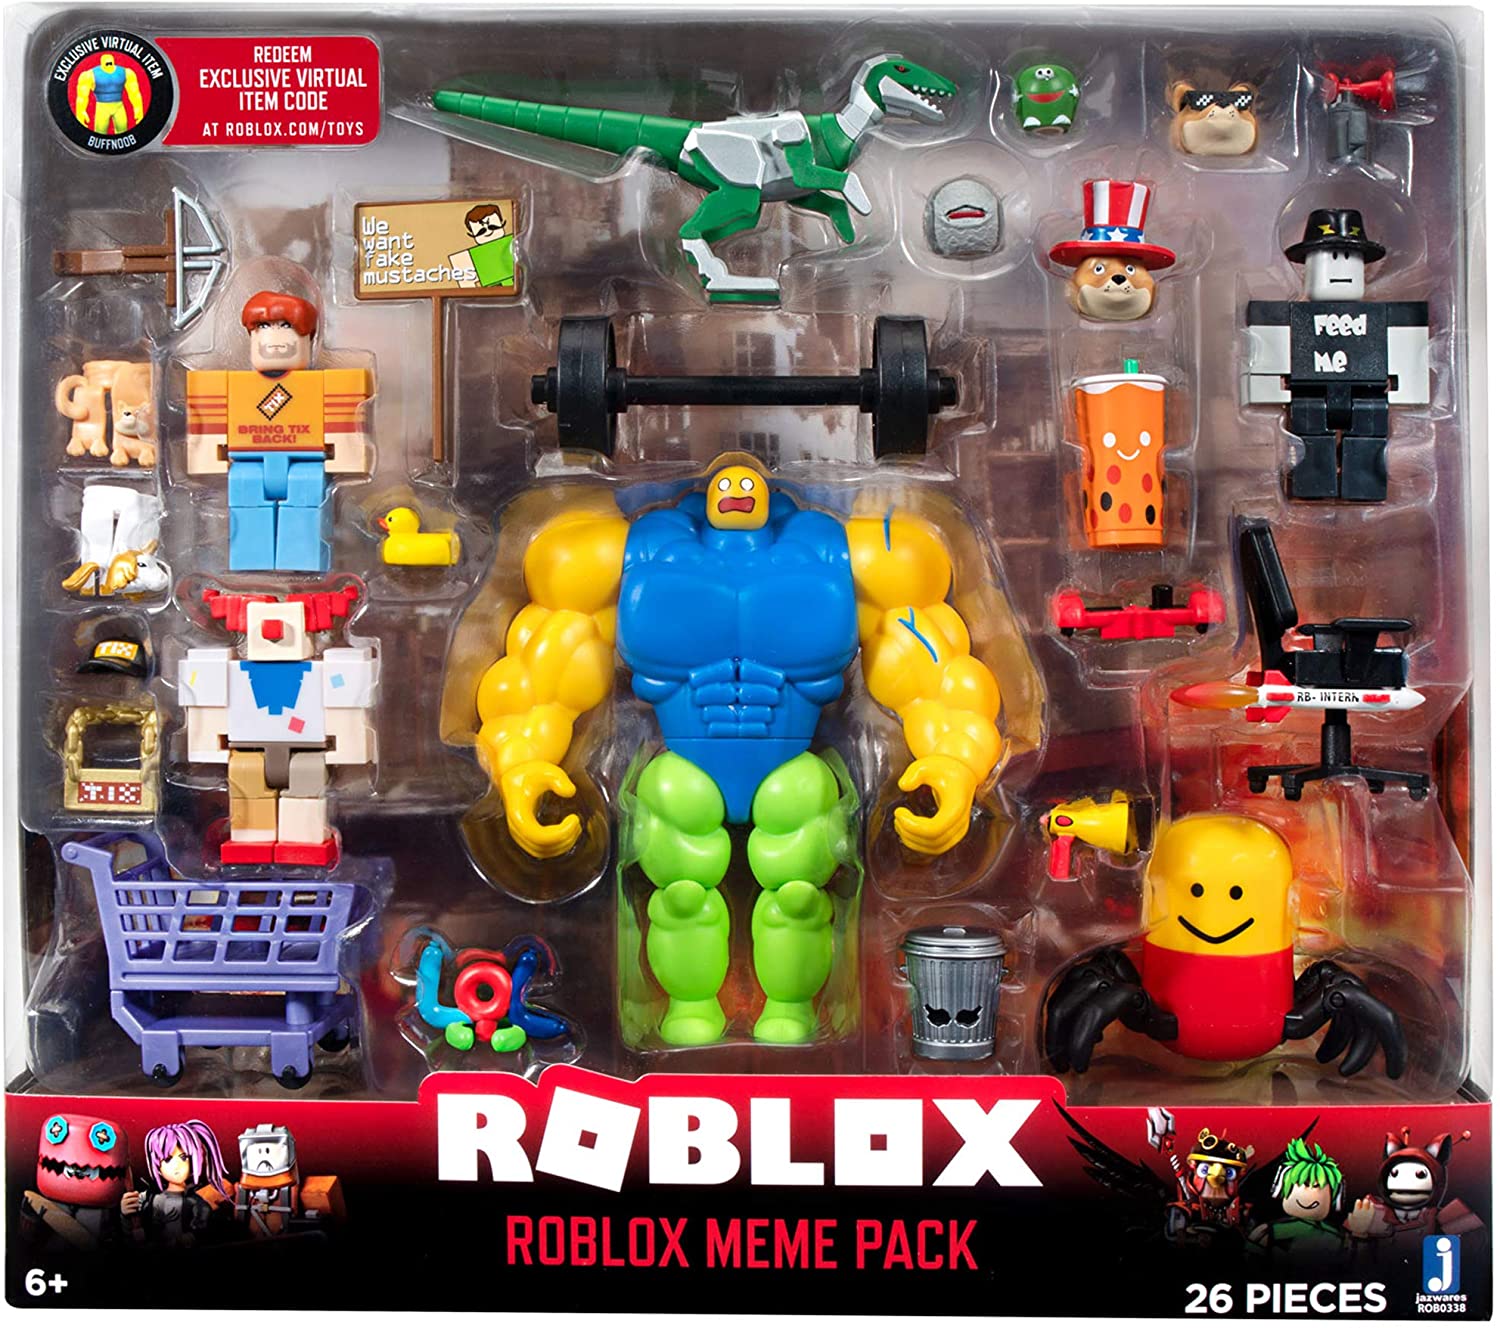 Dueldroid 5000 With Virtual Game Code Accessories Roblox Toys Action Figures Tv Movie Video Games Djroncarpenito Toys Hobbies - roblox toy virtual items